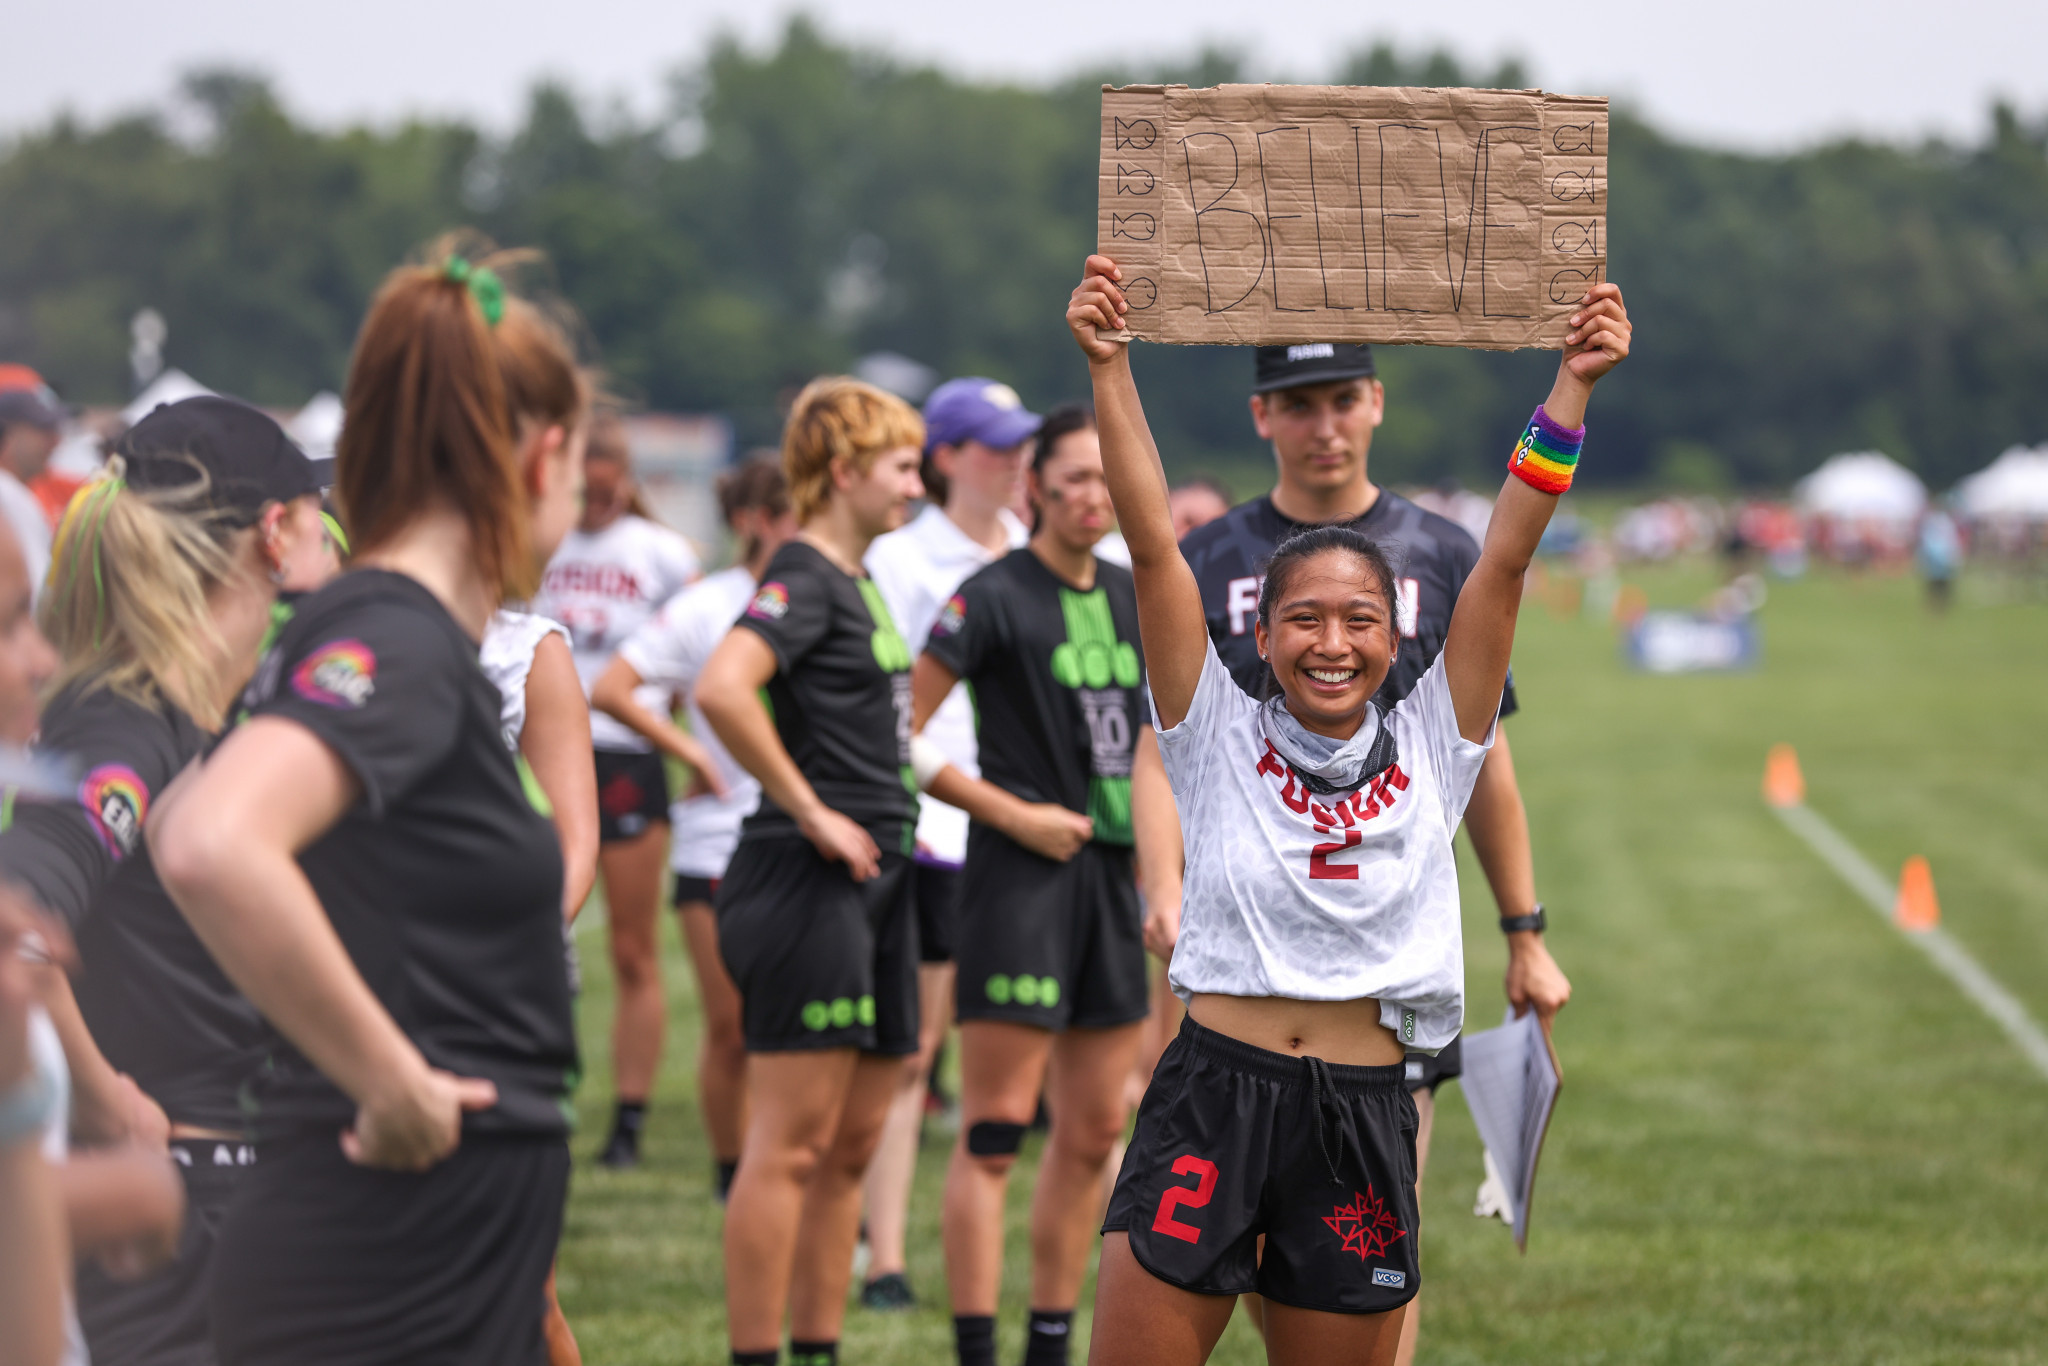 Ellipsis and Fusion met in women's Pool F ©Paul Rutherford for UltiPhotos